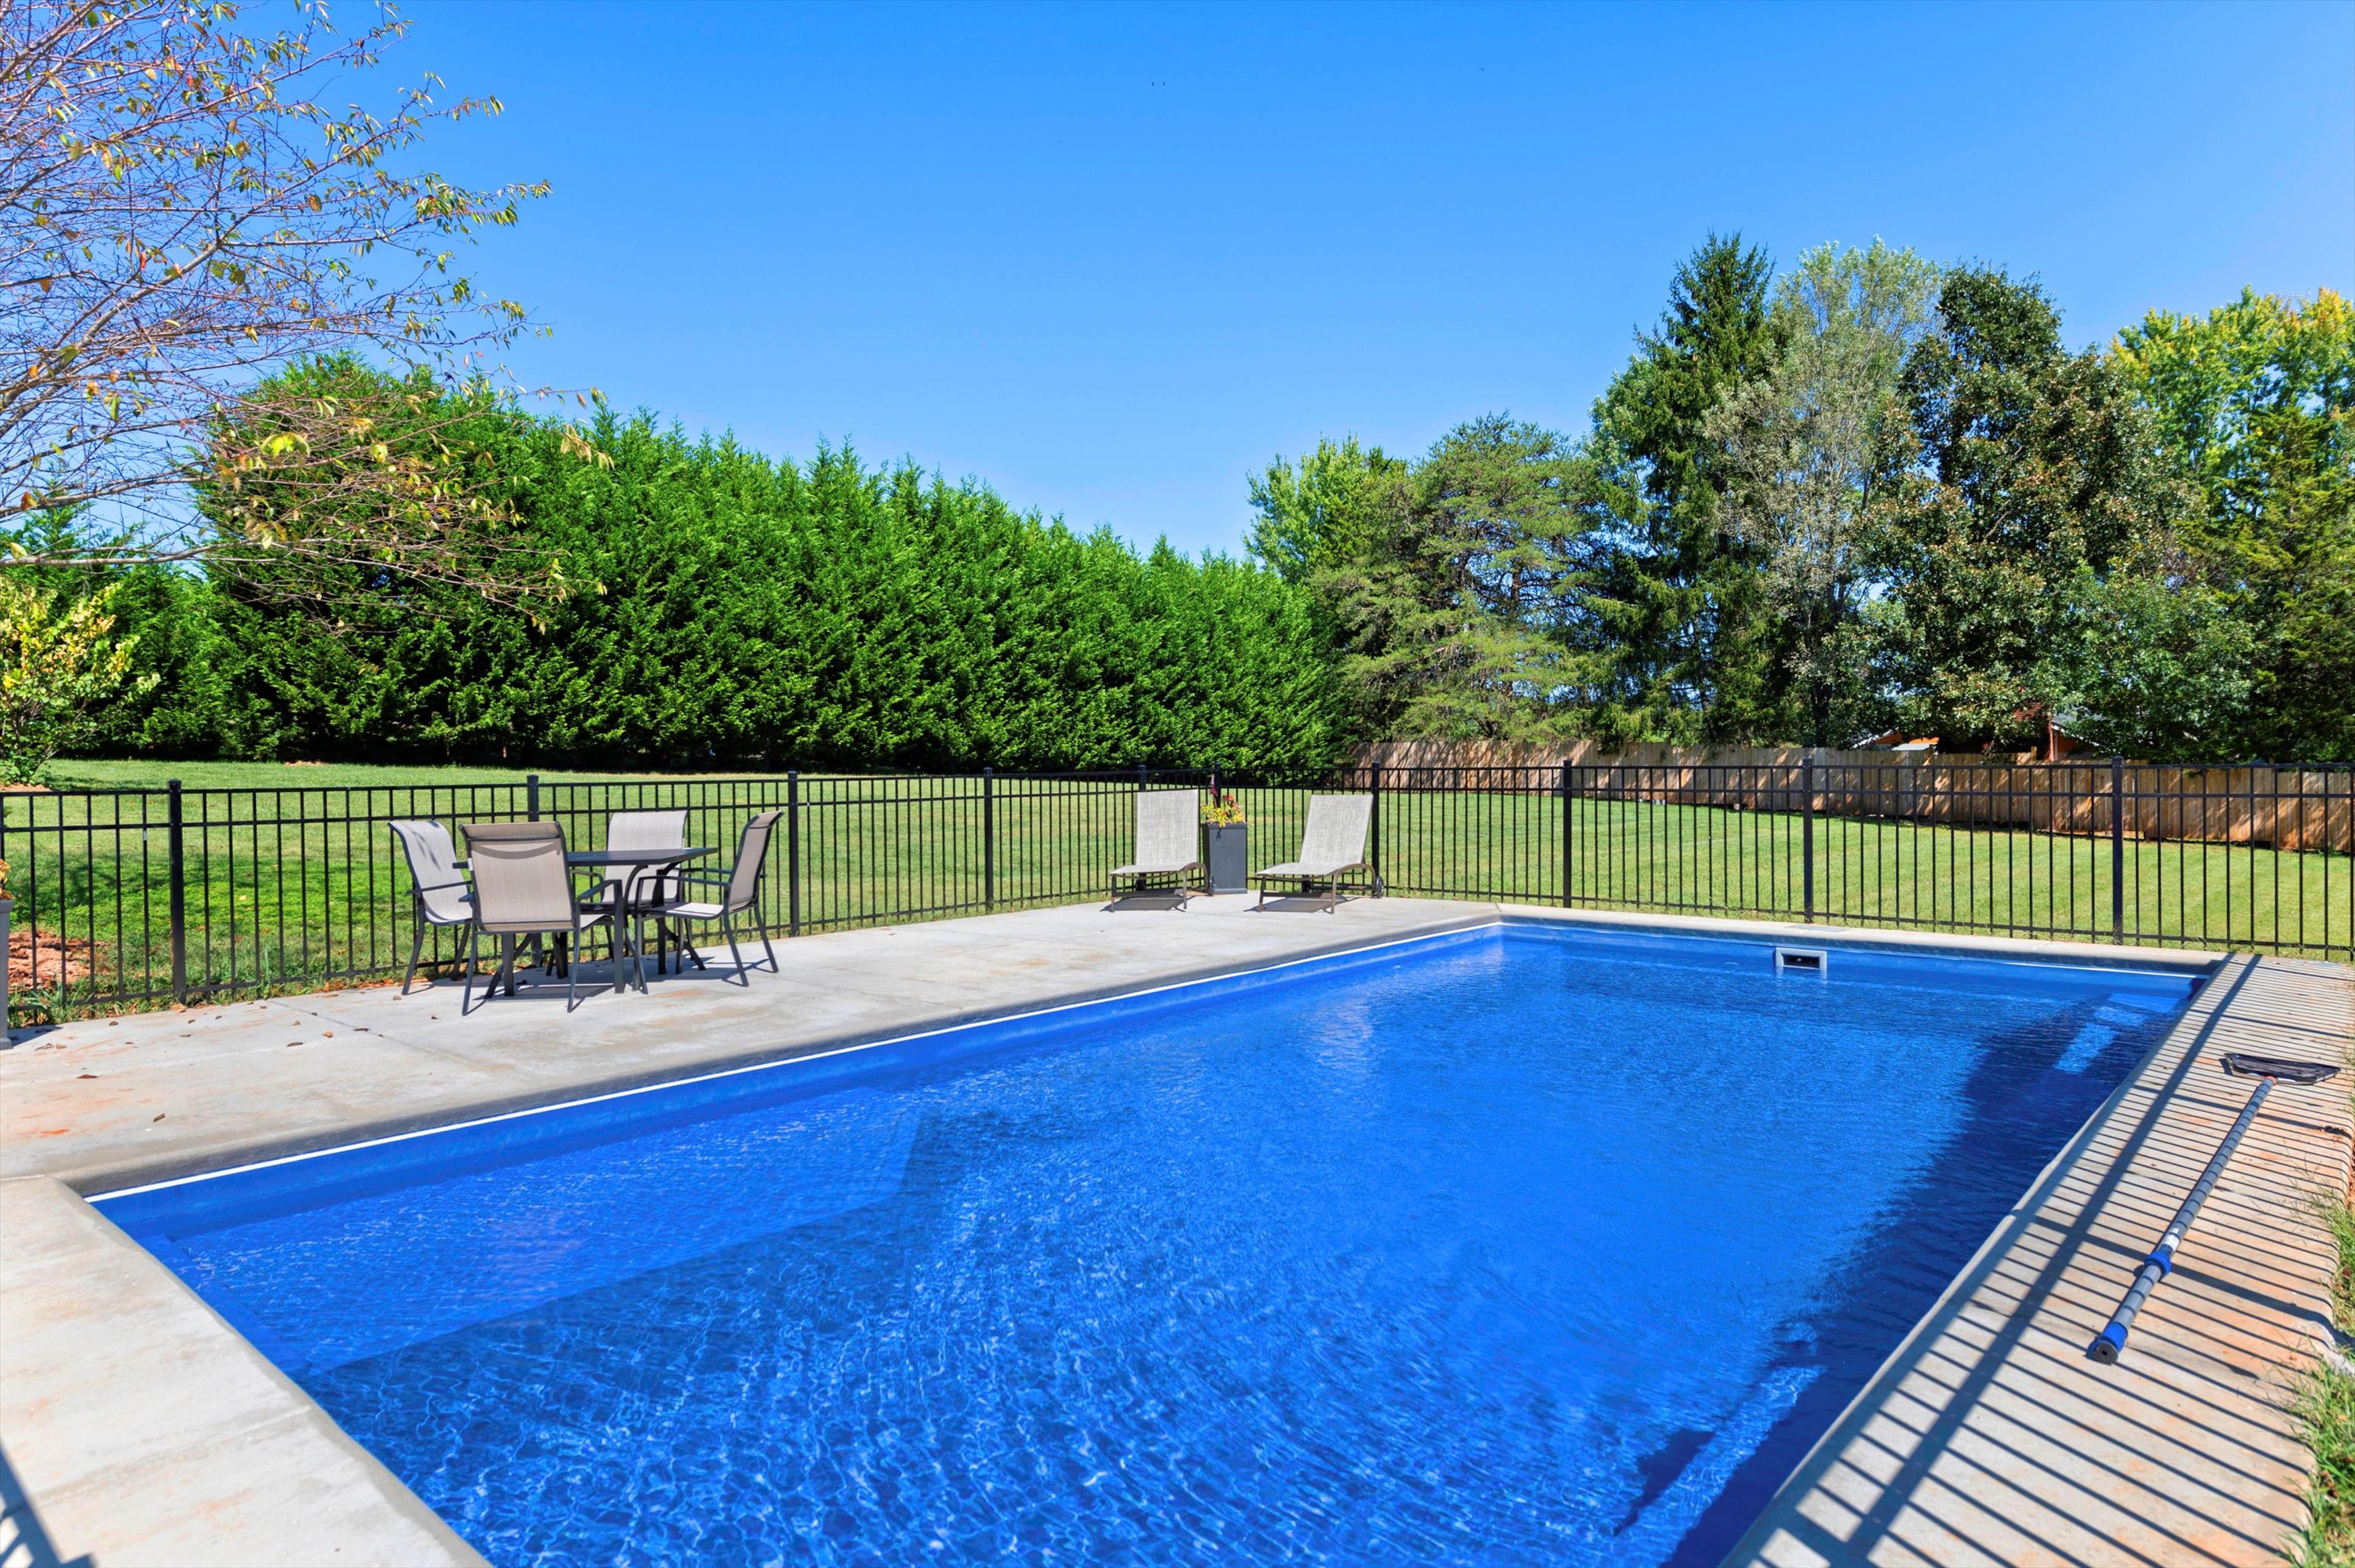 Property Image 2 - Brand New Pool and Hot Tub! Premium Wifi! Luxurious Home in Asheville. Bathrooms en-suite!